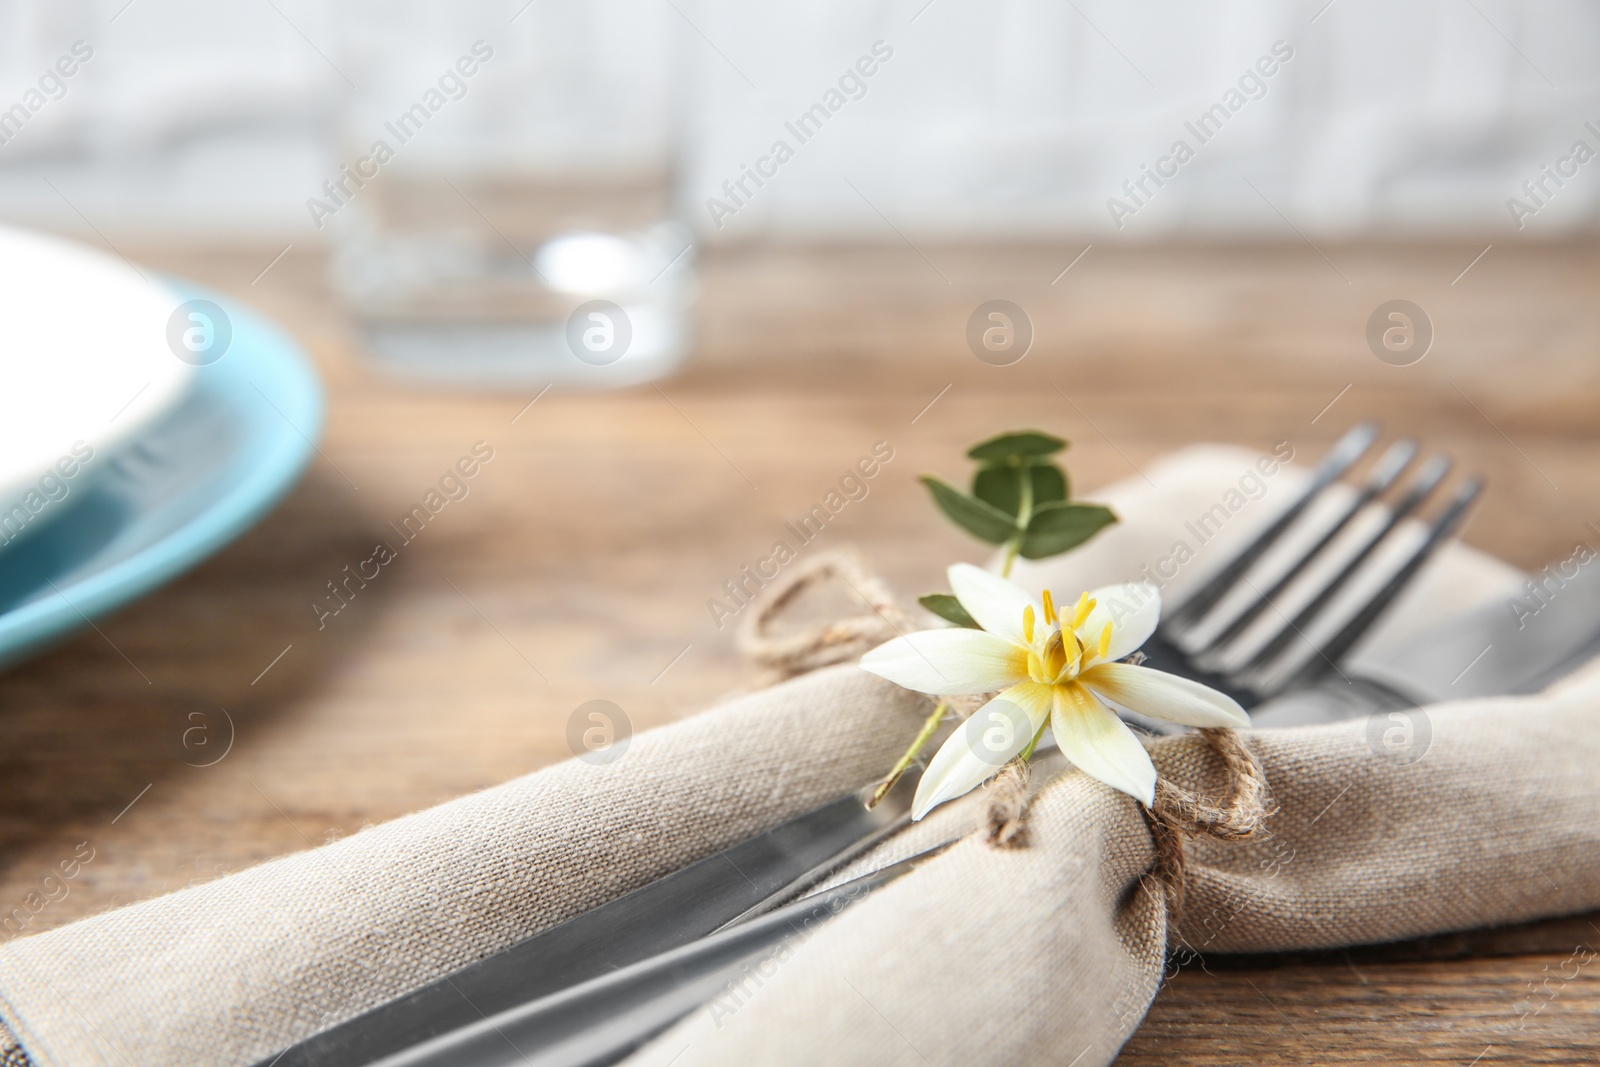 Photo of Cutlery set and dishware on wooden table, closeup